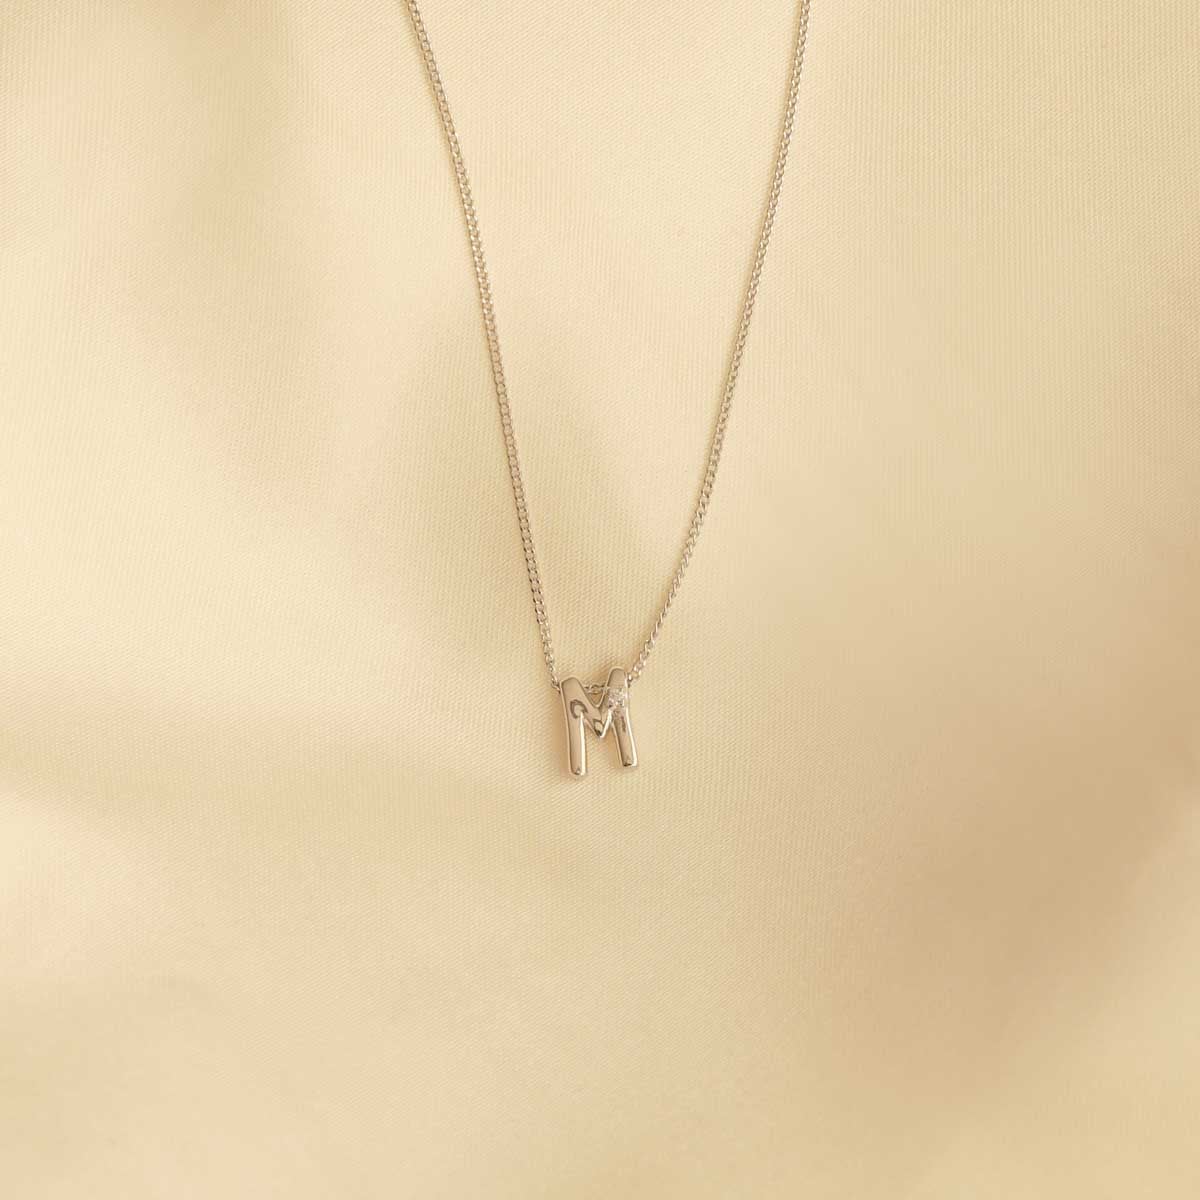 Flat lay shot of M Initial Pendant Necklace in Silver